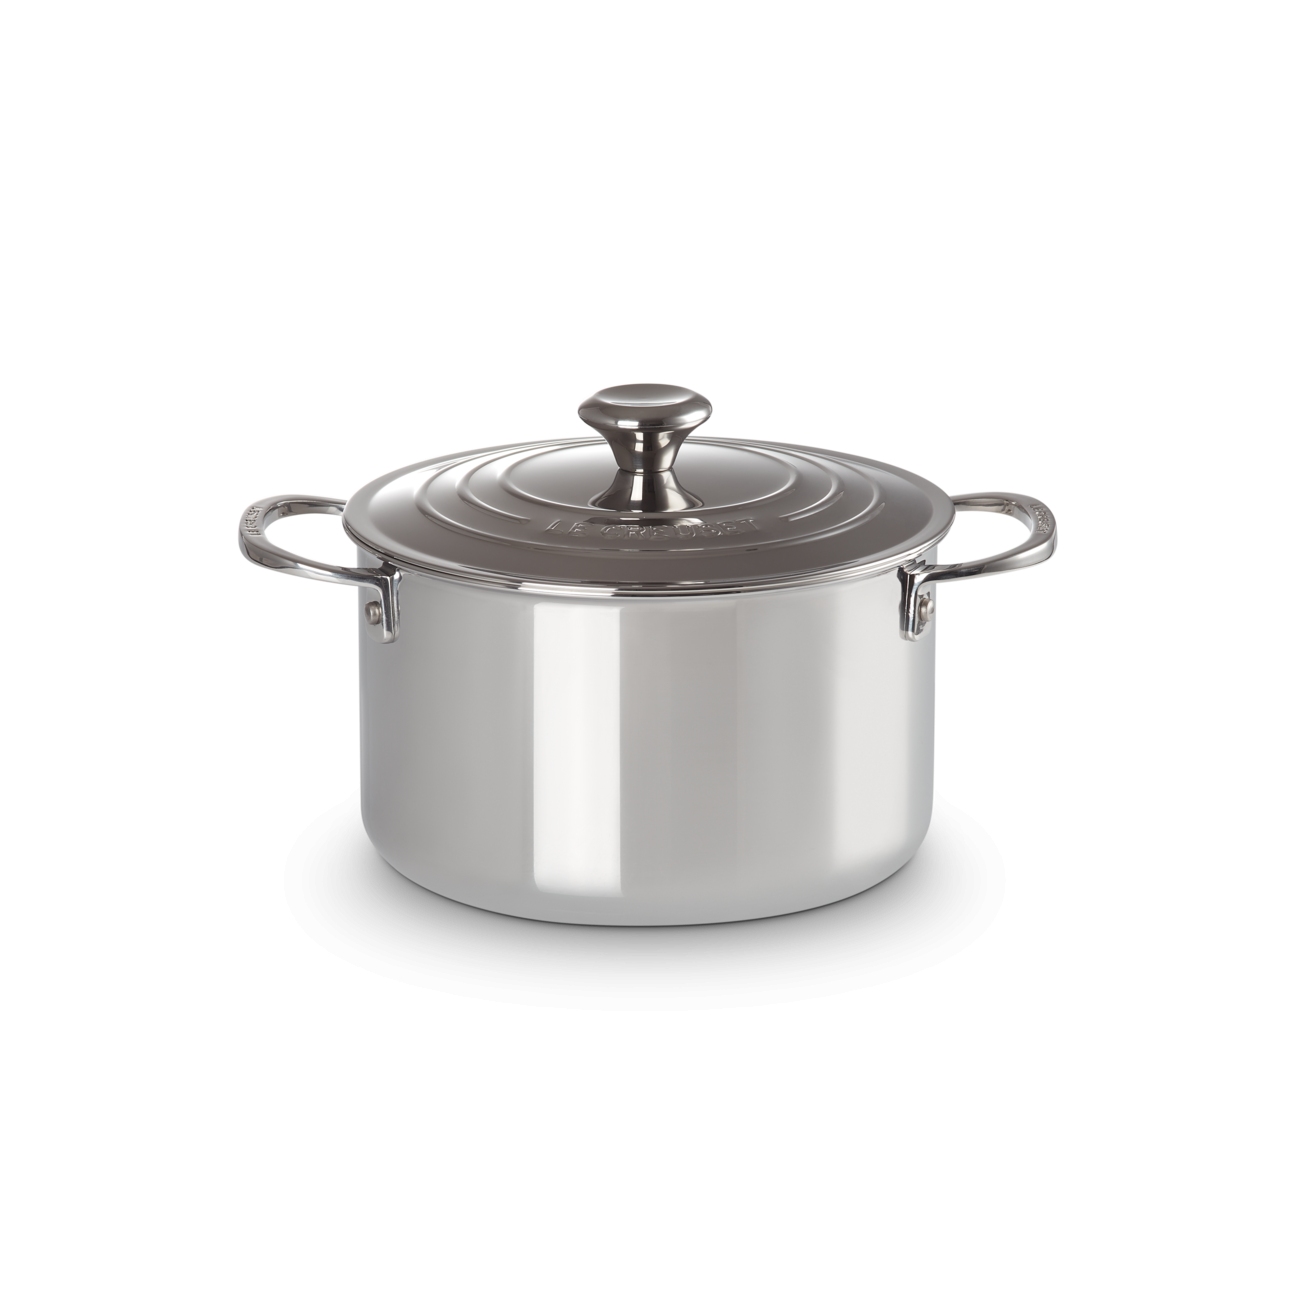 https://www.tattahome.com/53049-large_default/le-creuset-signature-stainless-steel-deep-casserole-with-lid-18.jpg